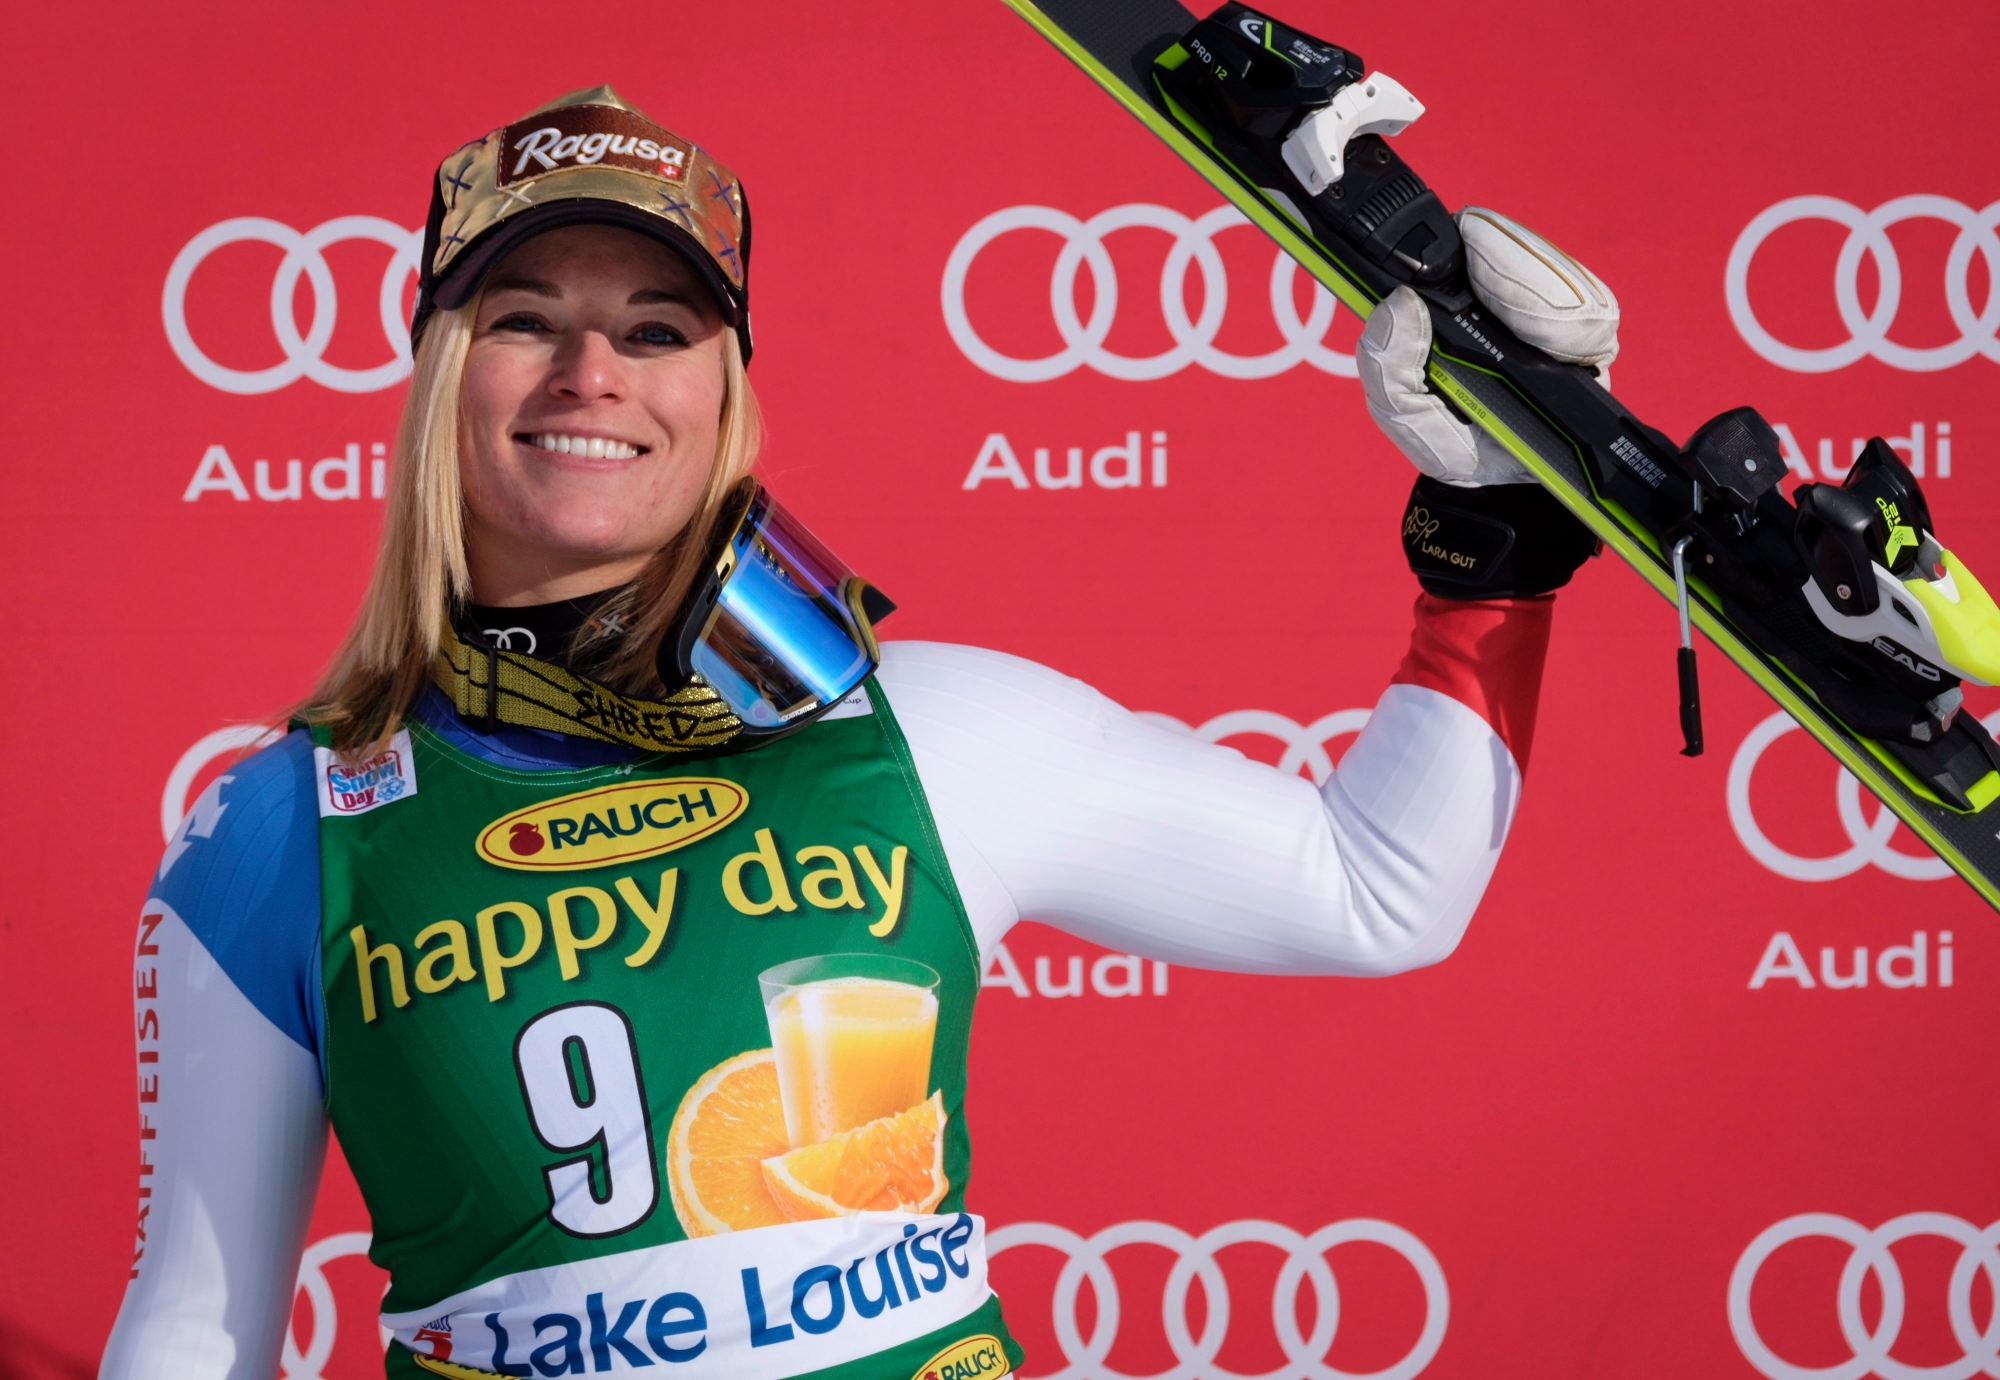 Switzerland's Lara Gut celebrates her second-place finish on the podium following the women's World Cup super-G ski race at Lake Louise, Alberta, Sunday, Dec. 3, 2017. (Jeff McIntosh/The Canadian Press via AP) Canada WCup Womens Super G Skiing